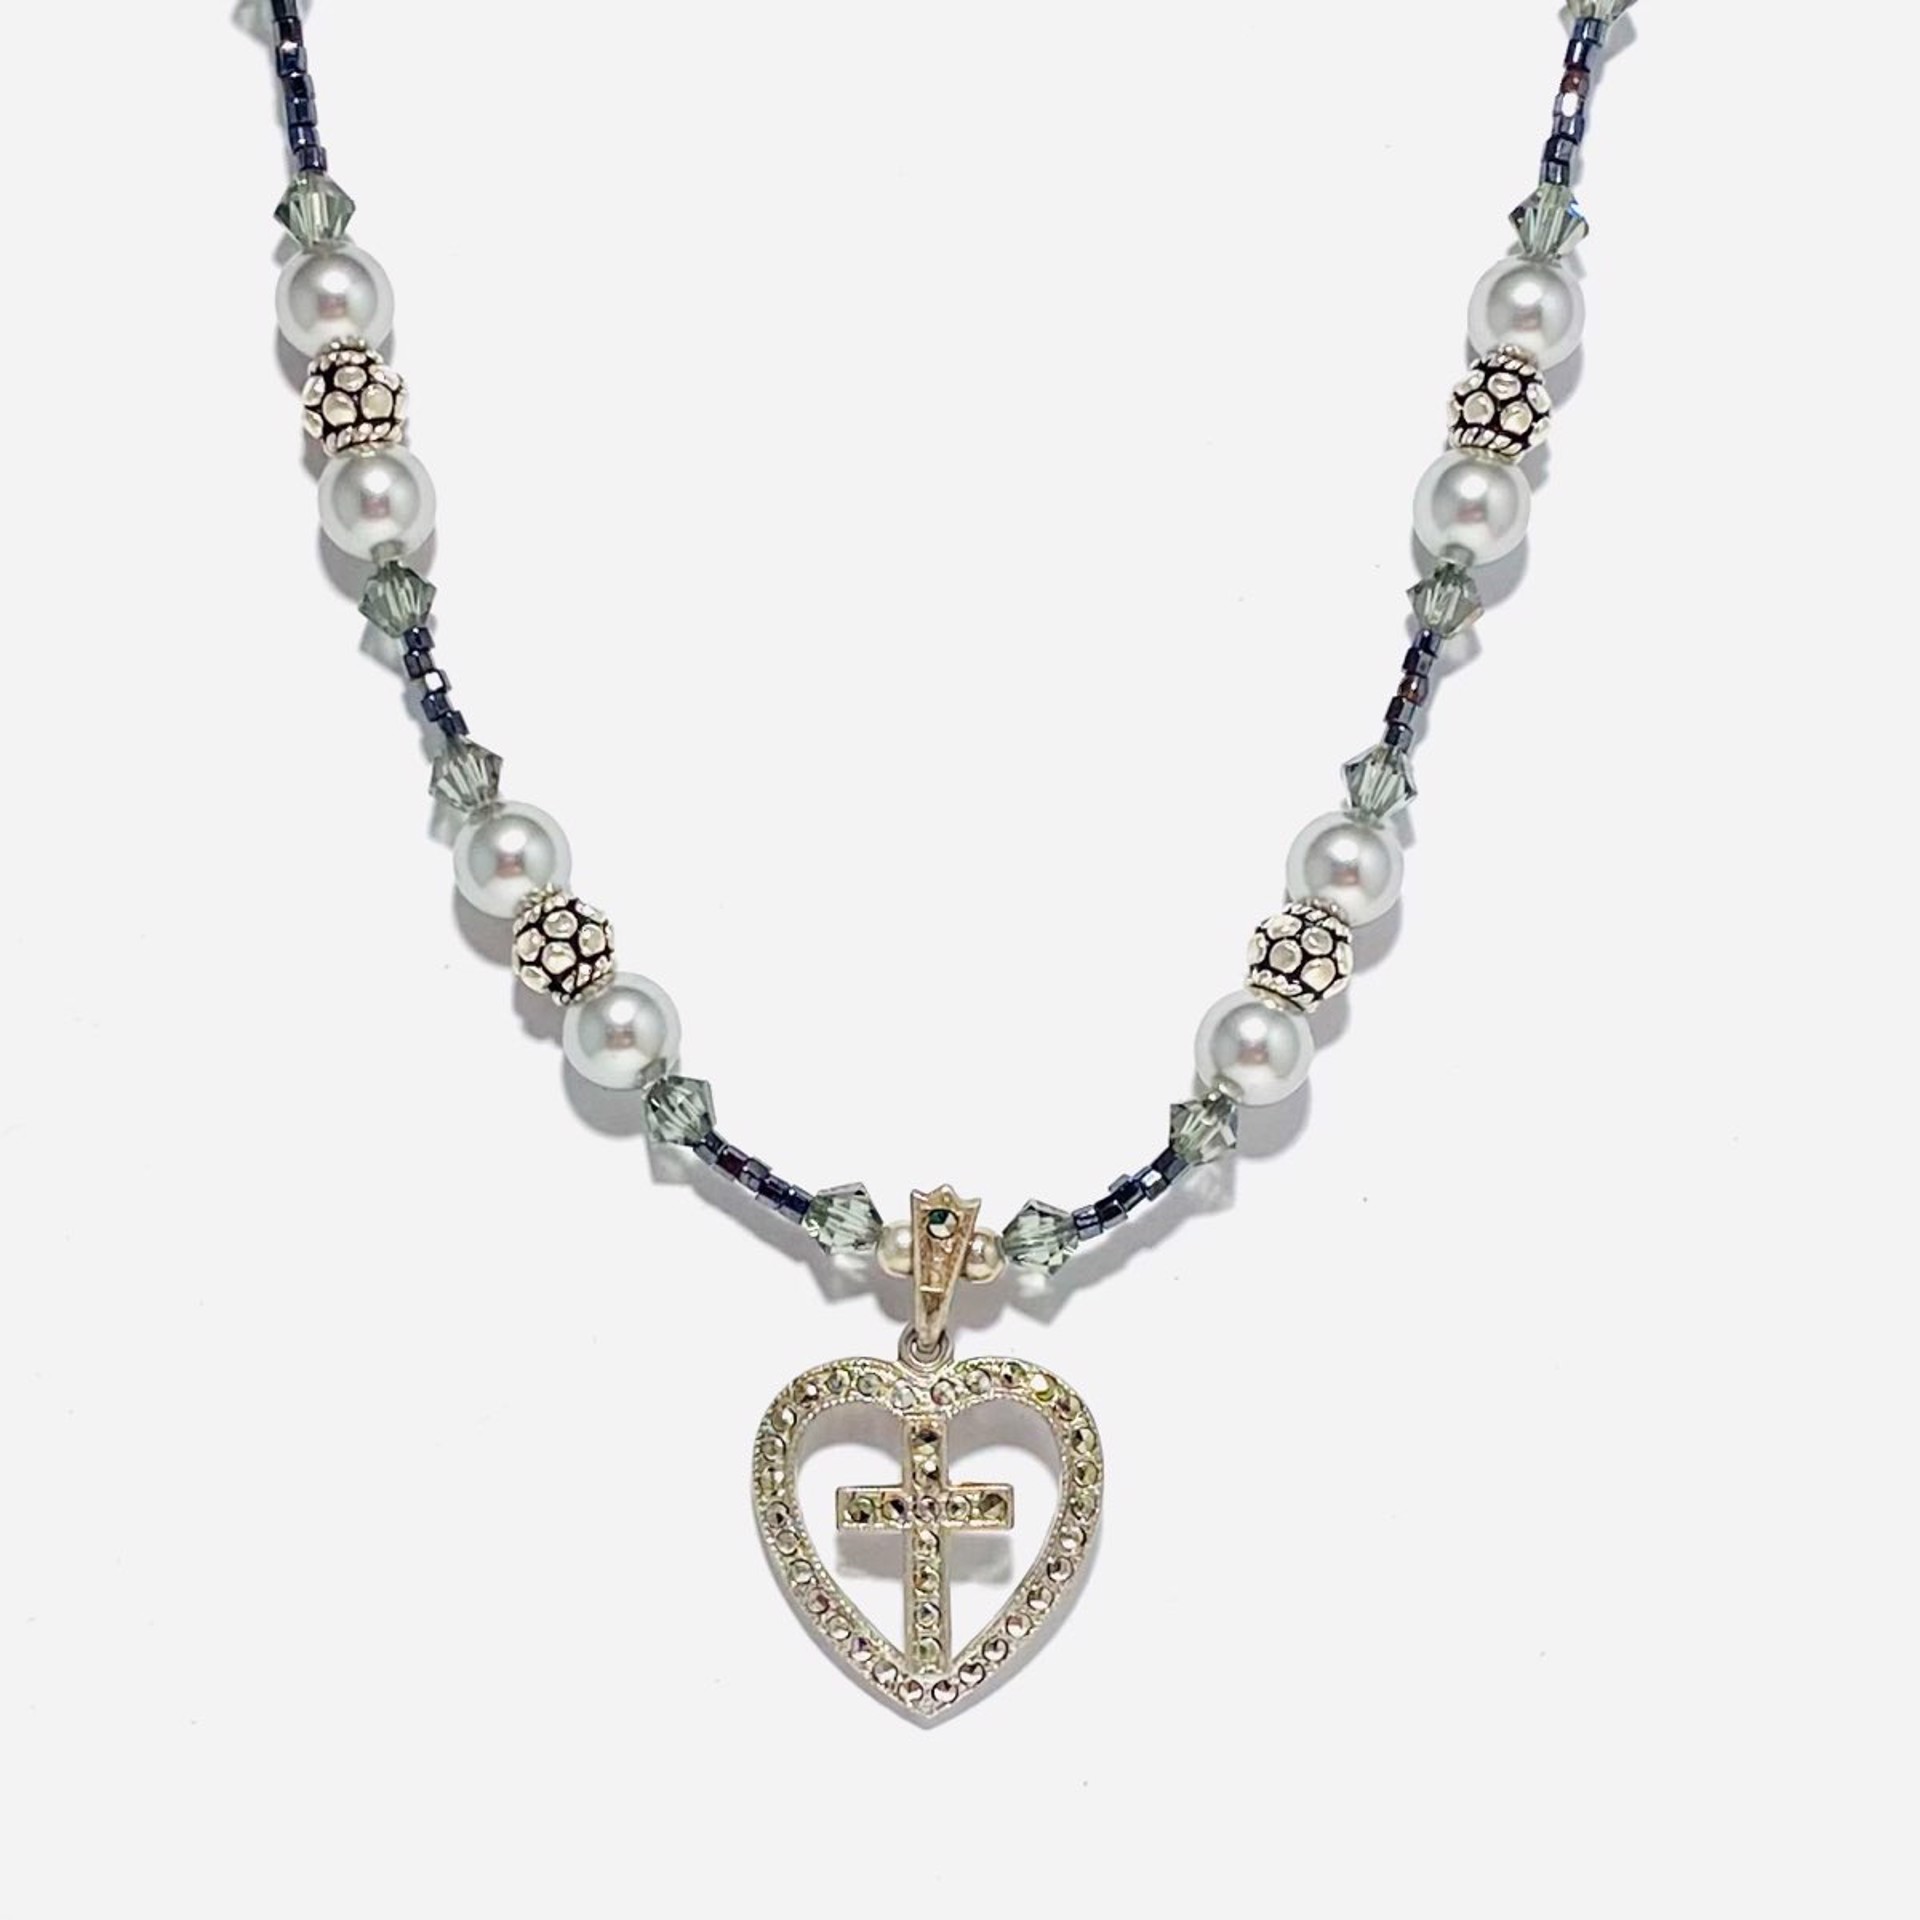 Marcasite Vintage Cross and Heart 18" Necklace SHOSH22-49 by Shoshannah Weinisch